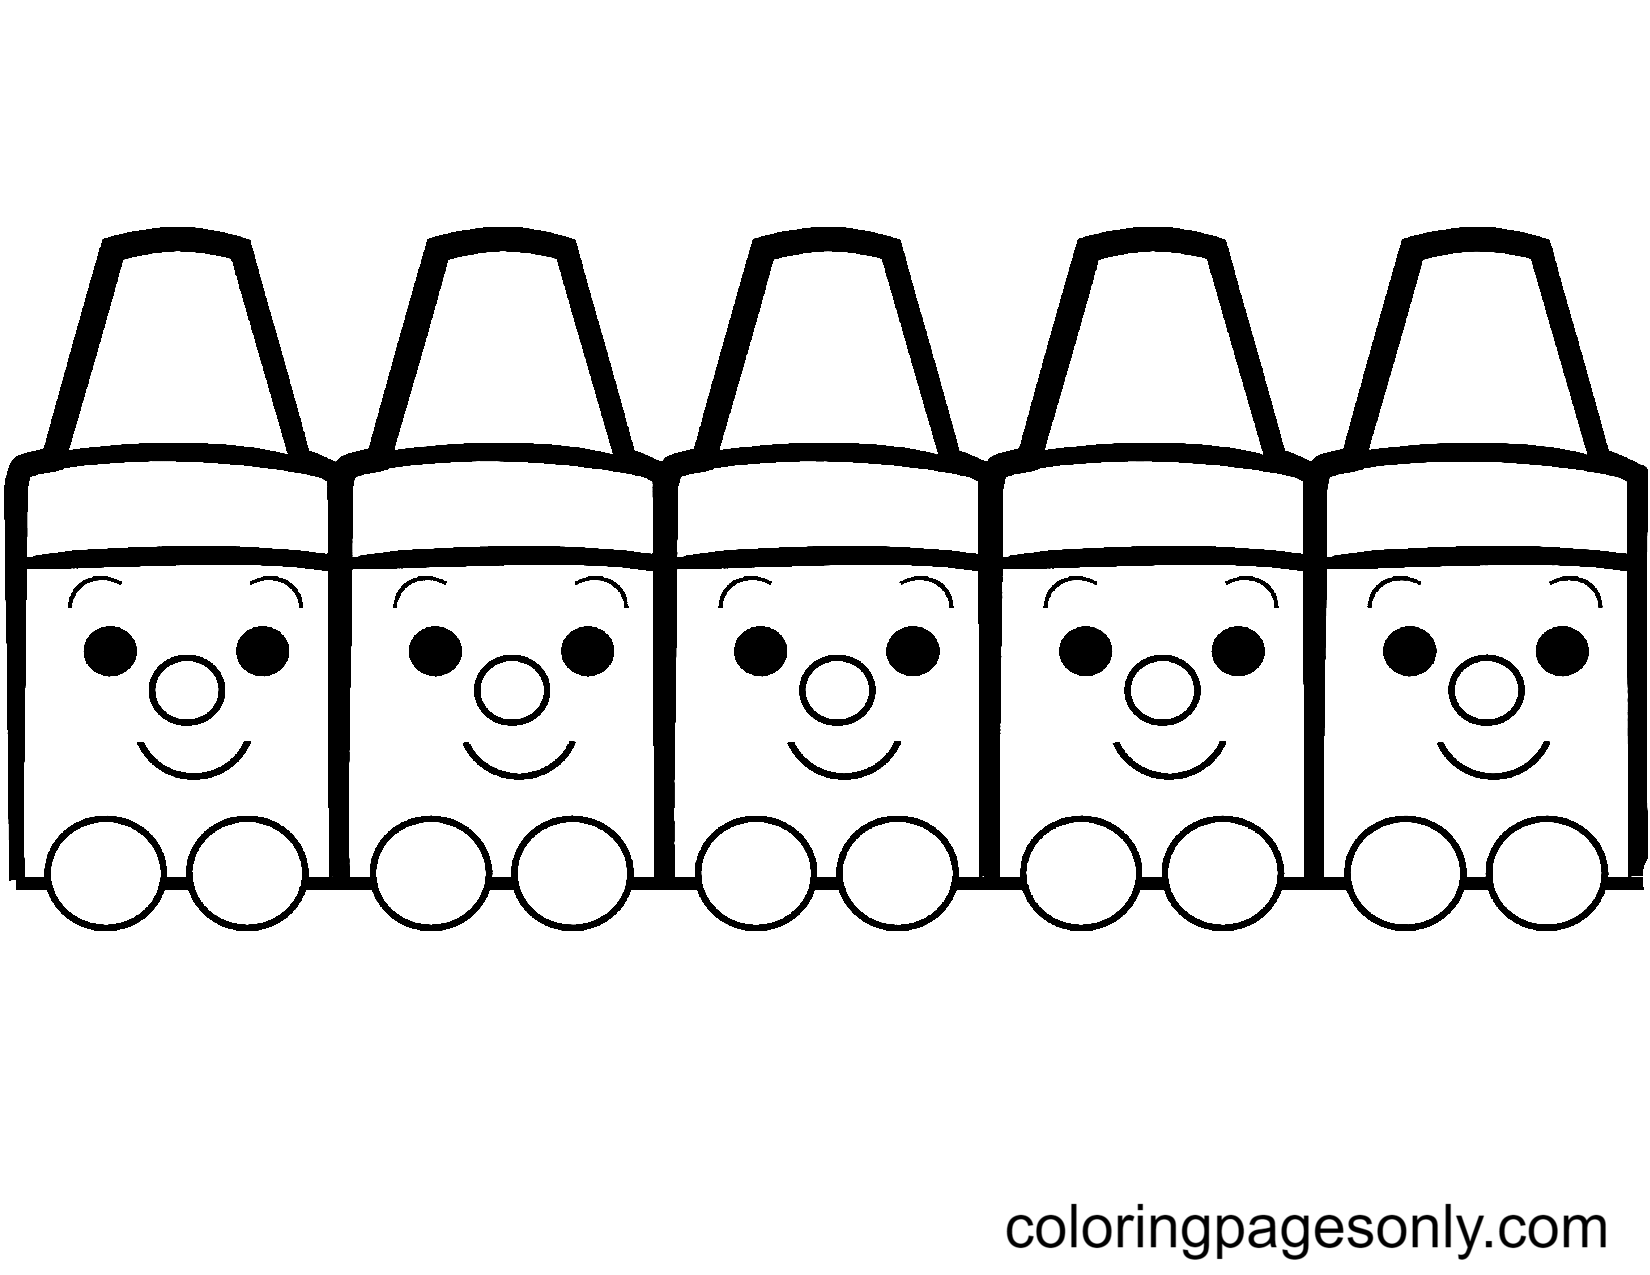 Cute Crayons Coloring Pages - Crayon Coloring Pages - Coloring Pages For  Kids And Adults